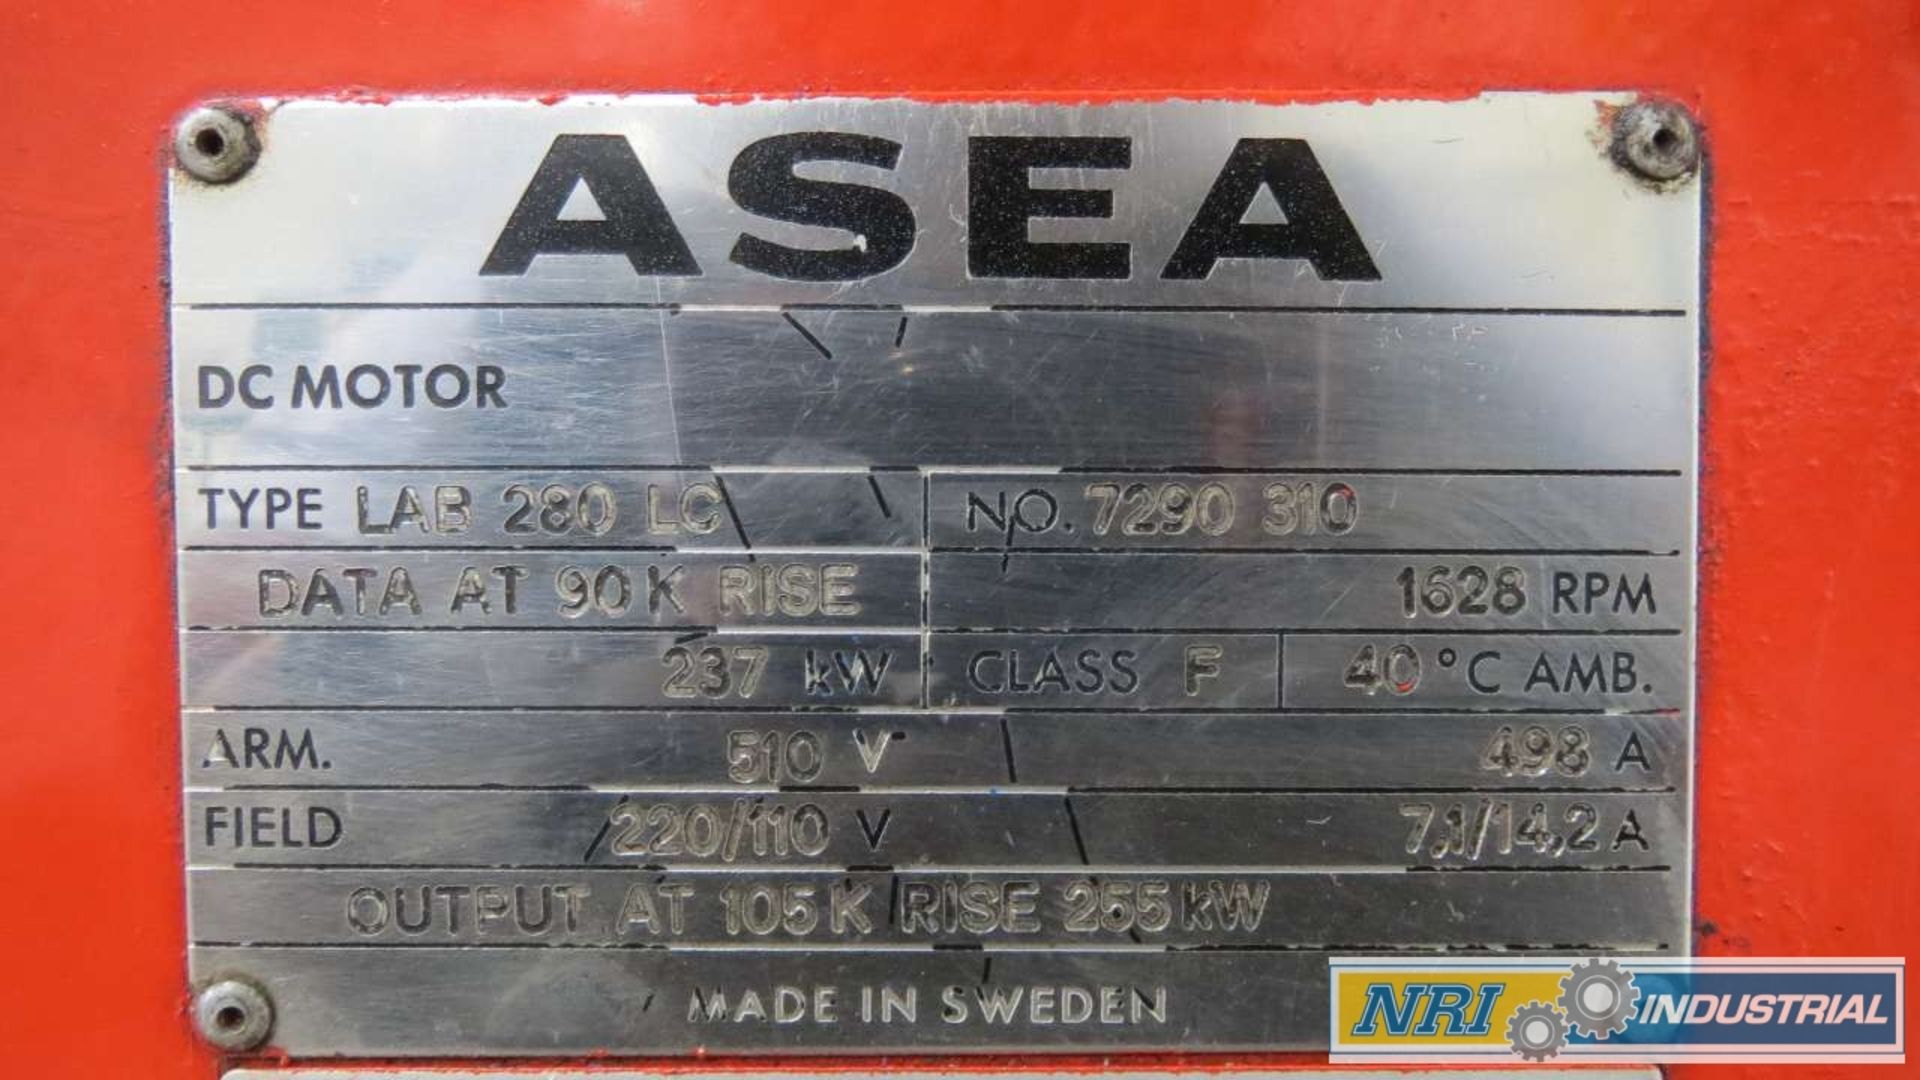 ASEA LAB 280 LC FORCED DRAUGHT 237KW 510V-DC 1628RPM DC ELECTRIC MOTOR - Image 3 of 4